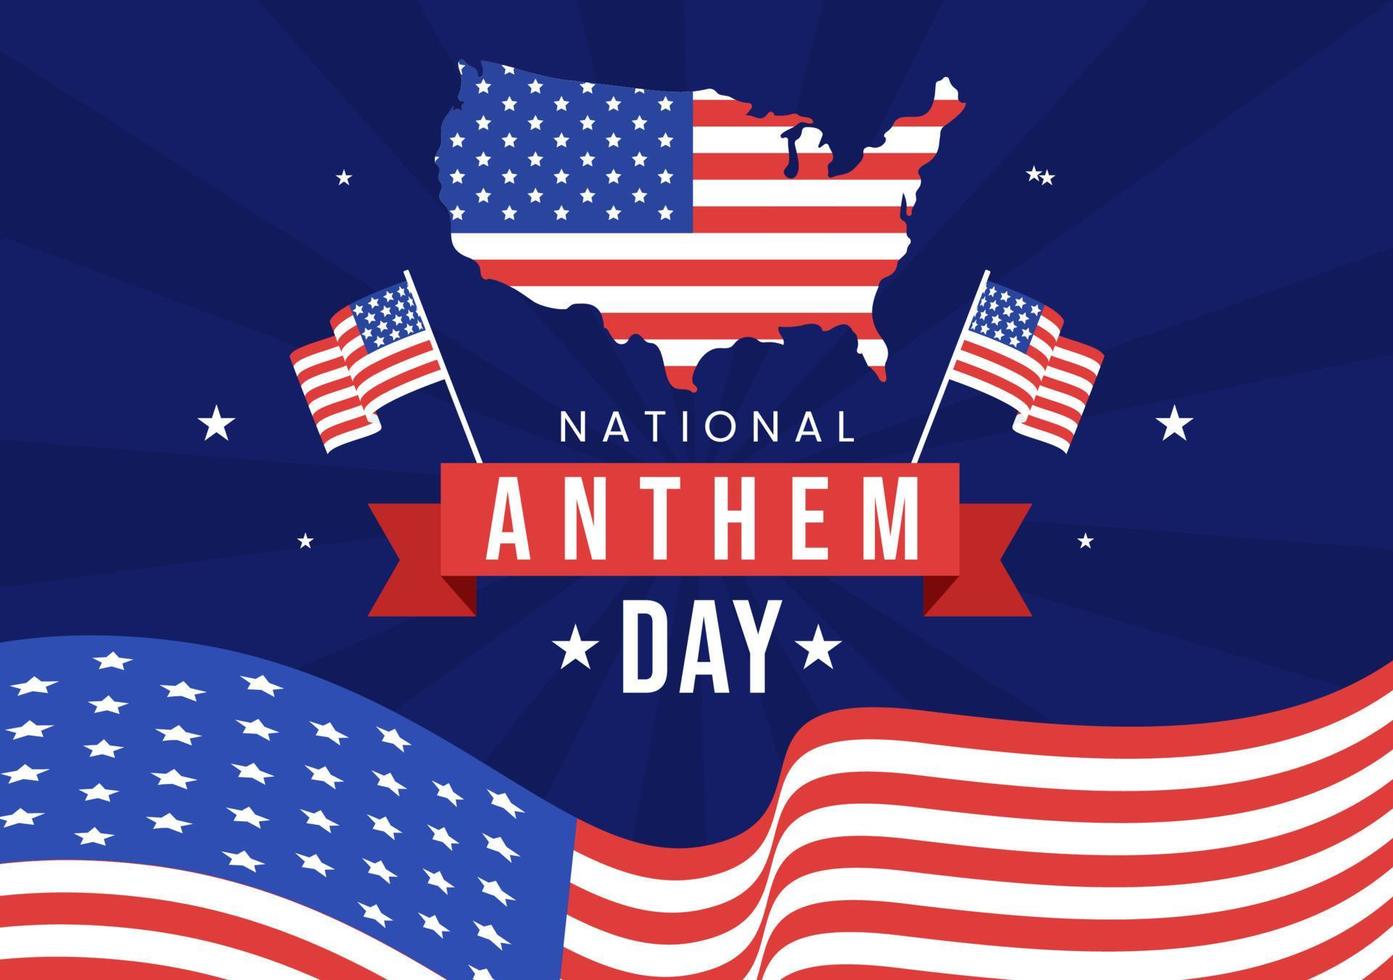 National Anthem Day on March 3 Illustration with United States of America Flag for Web Banner or Landing Page in Flat Cartoon Hand Drawn Template vector